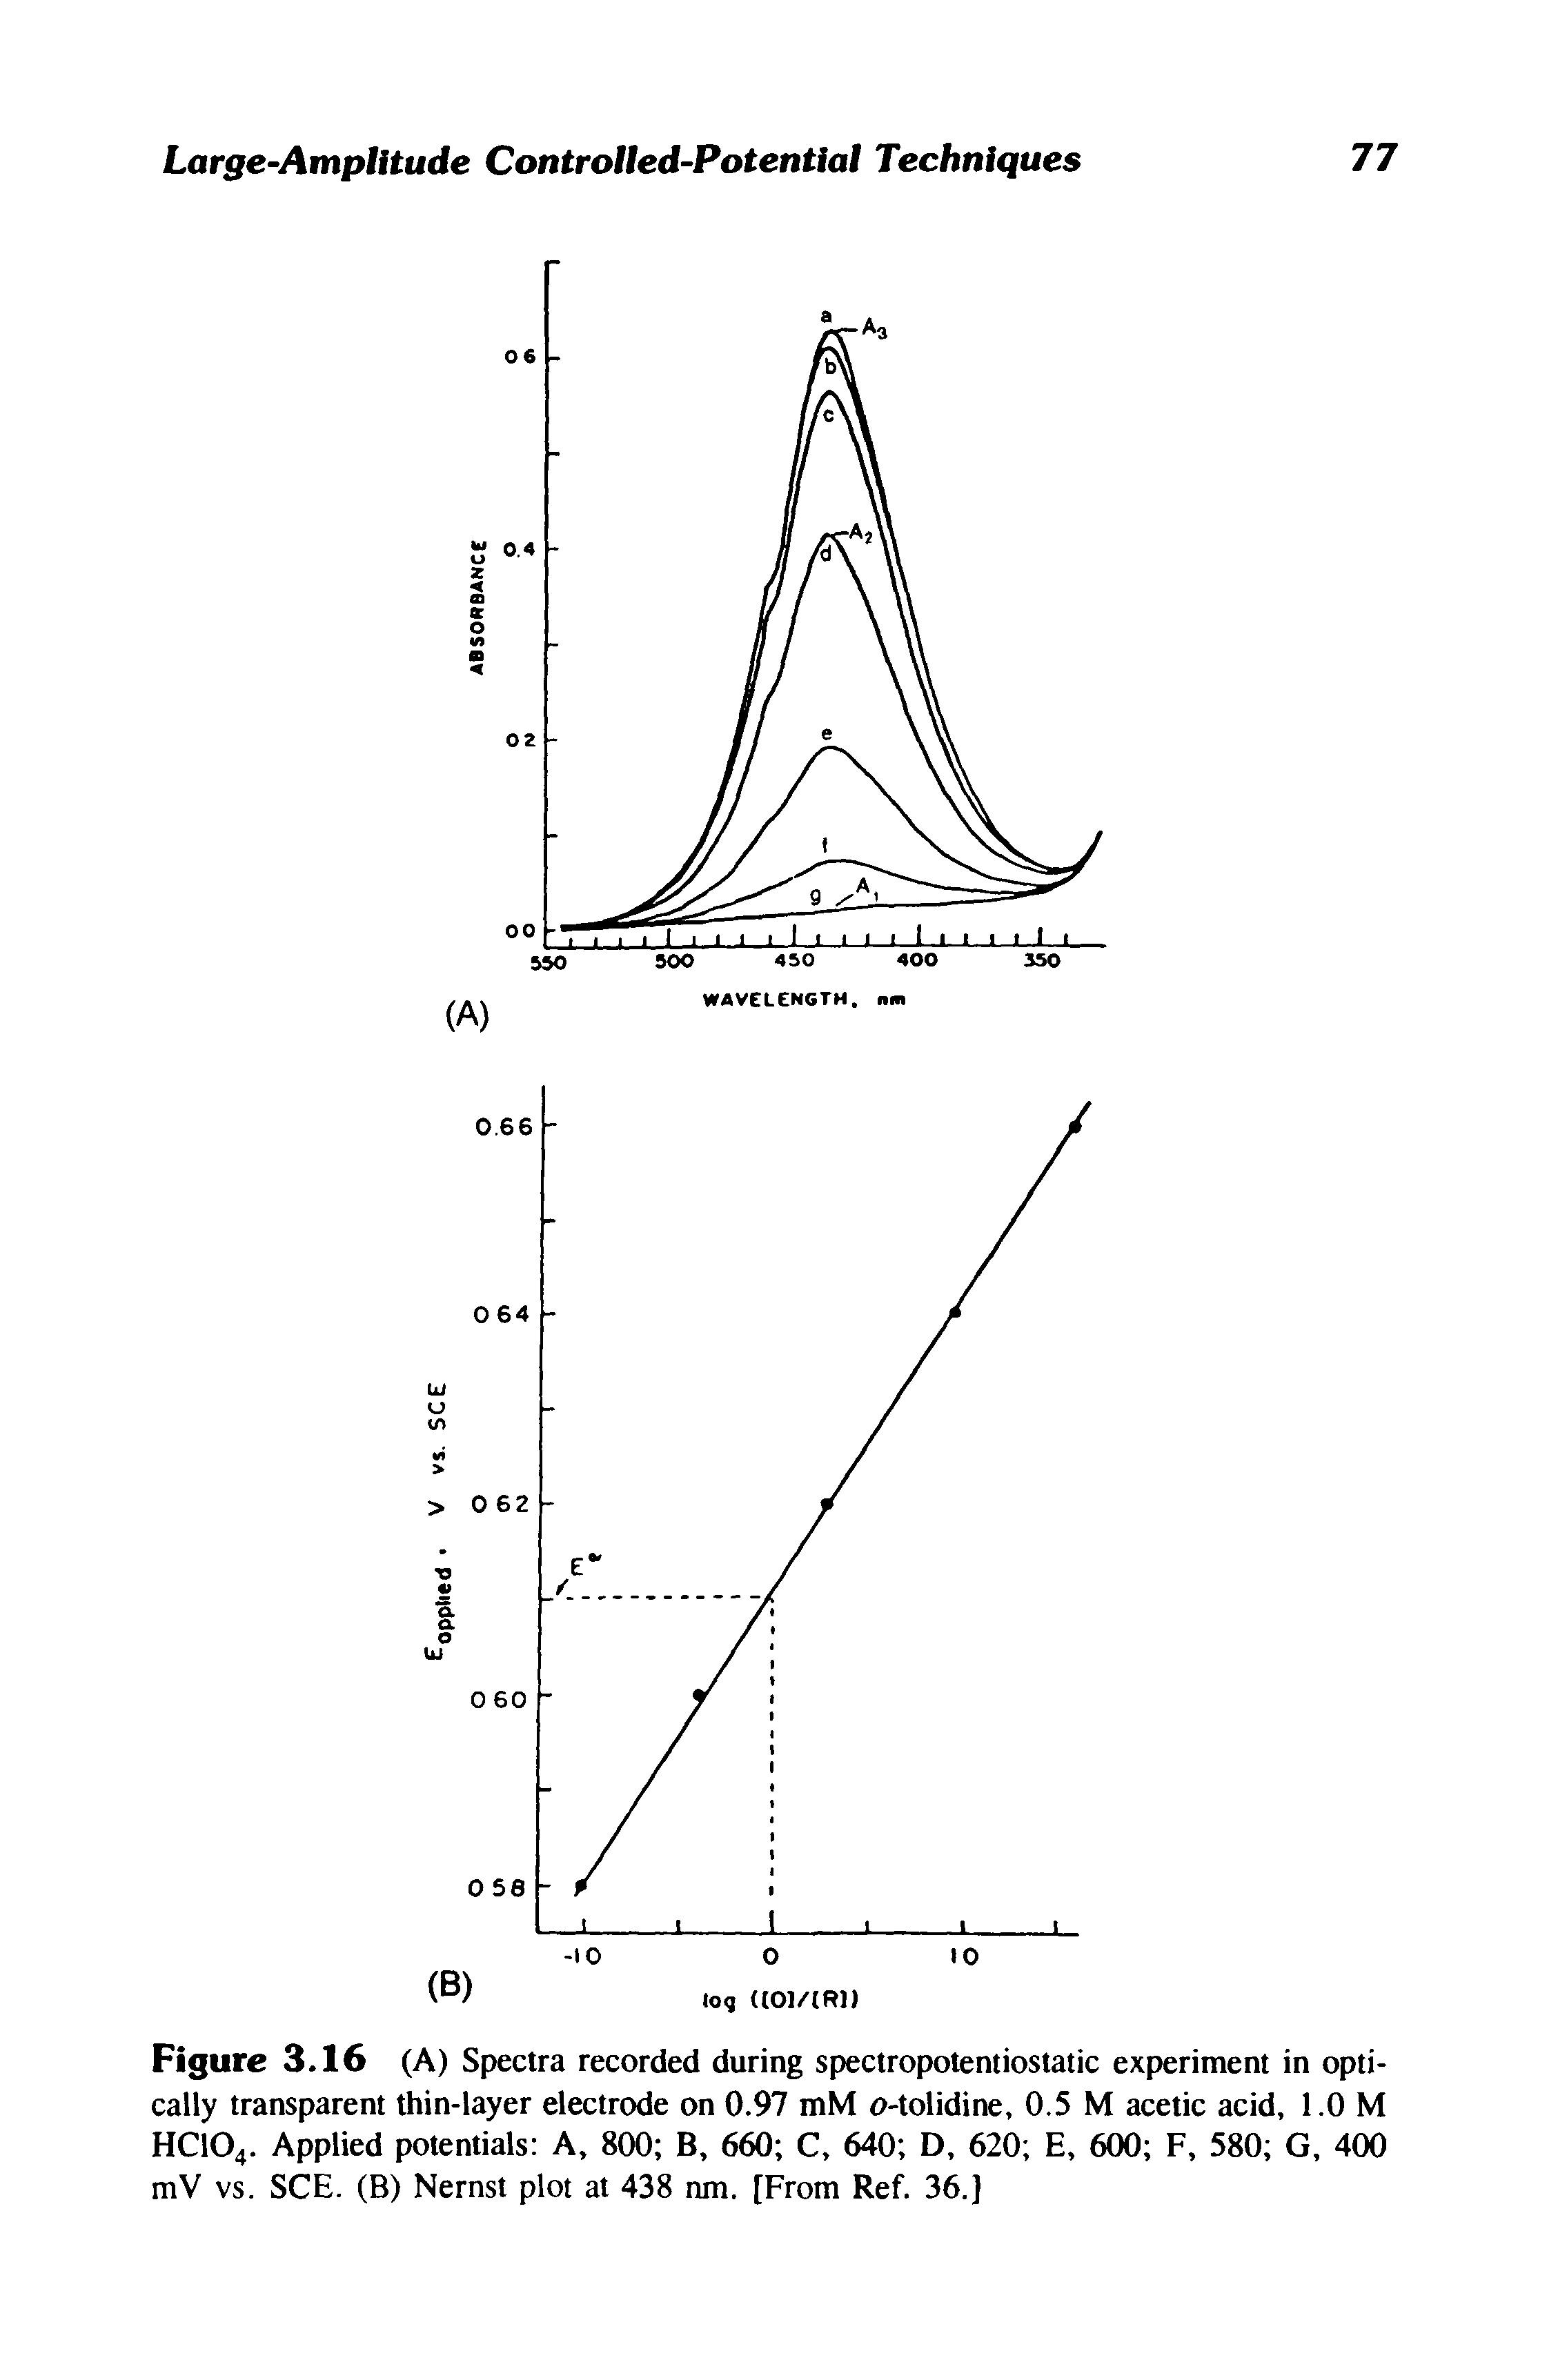 Figure 3.16 (A) Spectra recorded during spectropotentiostatic experiment in optically transparent thin-layer electrode on 0.97 mM o-tolidine, 0.5 M acetic acid, 1.0 M HC104. Applied potentials A, 800 B, 660 C, 640 D, 620 E, 600 F, 580 G, 400 mV vs. SCE. (B) Nernst plot at 438 nm. [From Ref. 36.]...